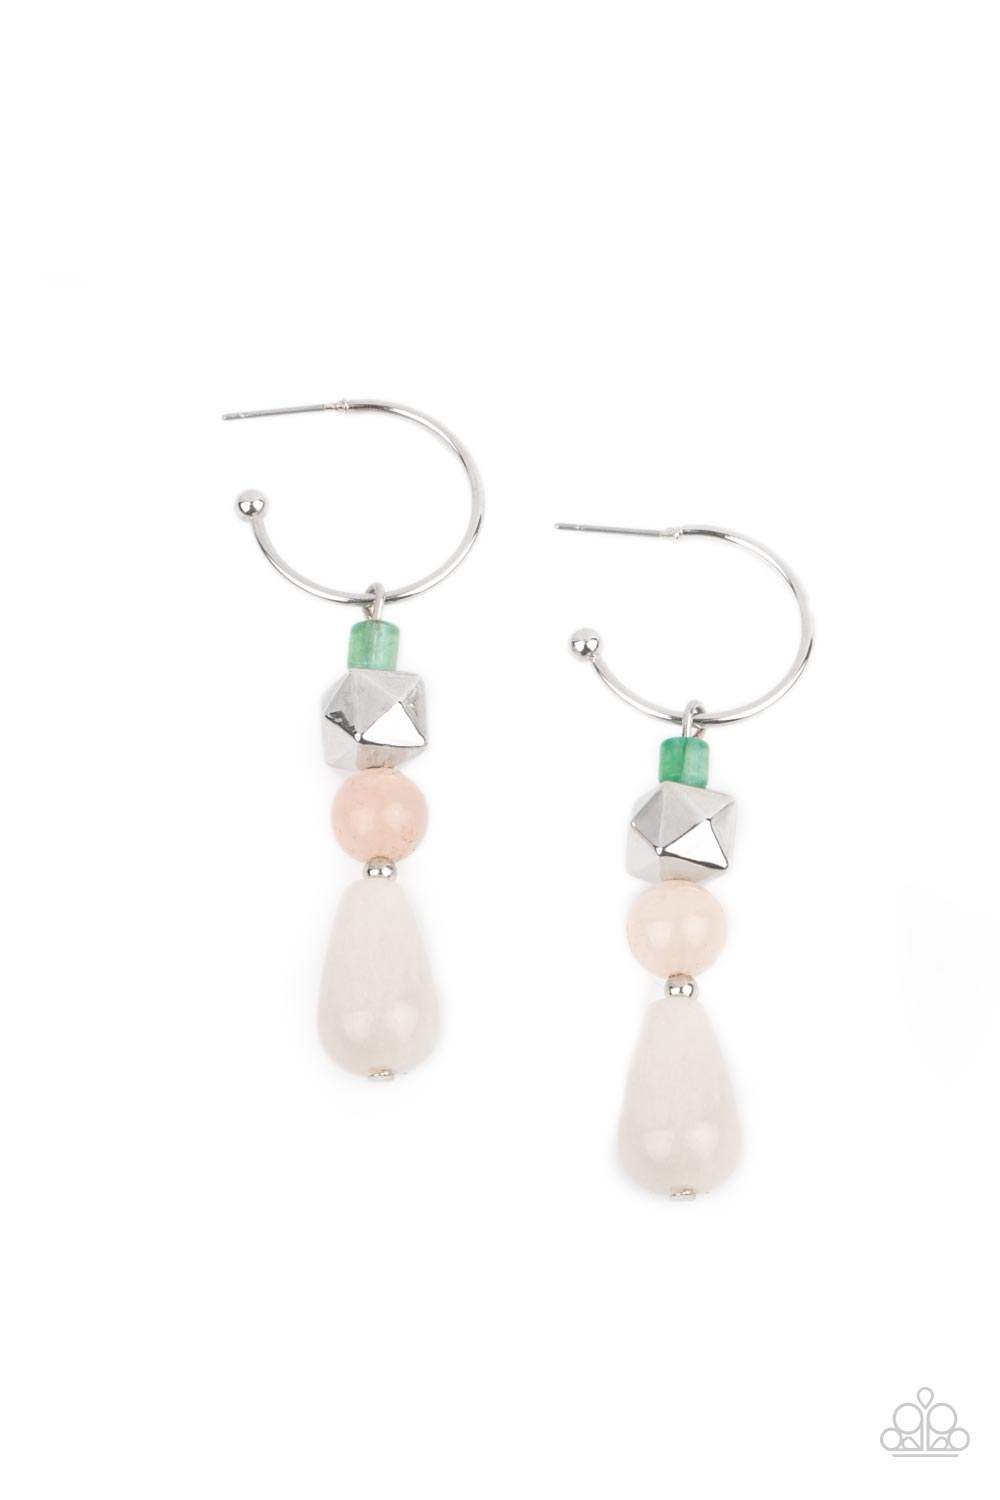 Boulevard Stroll - Multi Square Bead Earrings a charismatic collection of jade, pink, and white stone beads, accented with a silver faceted square bead, are threaded onto a silver pin which dangles from a dainty silver hoop. Earring attaches to a standard post fitting. Hoop measures approximately 3/4" in diameter.  Sold as one pair of hoop earrings.